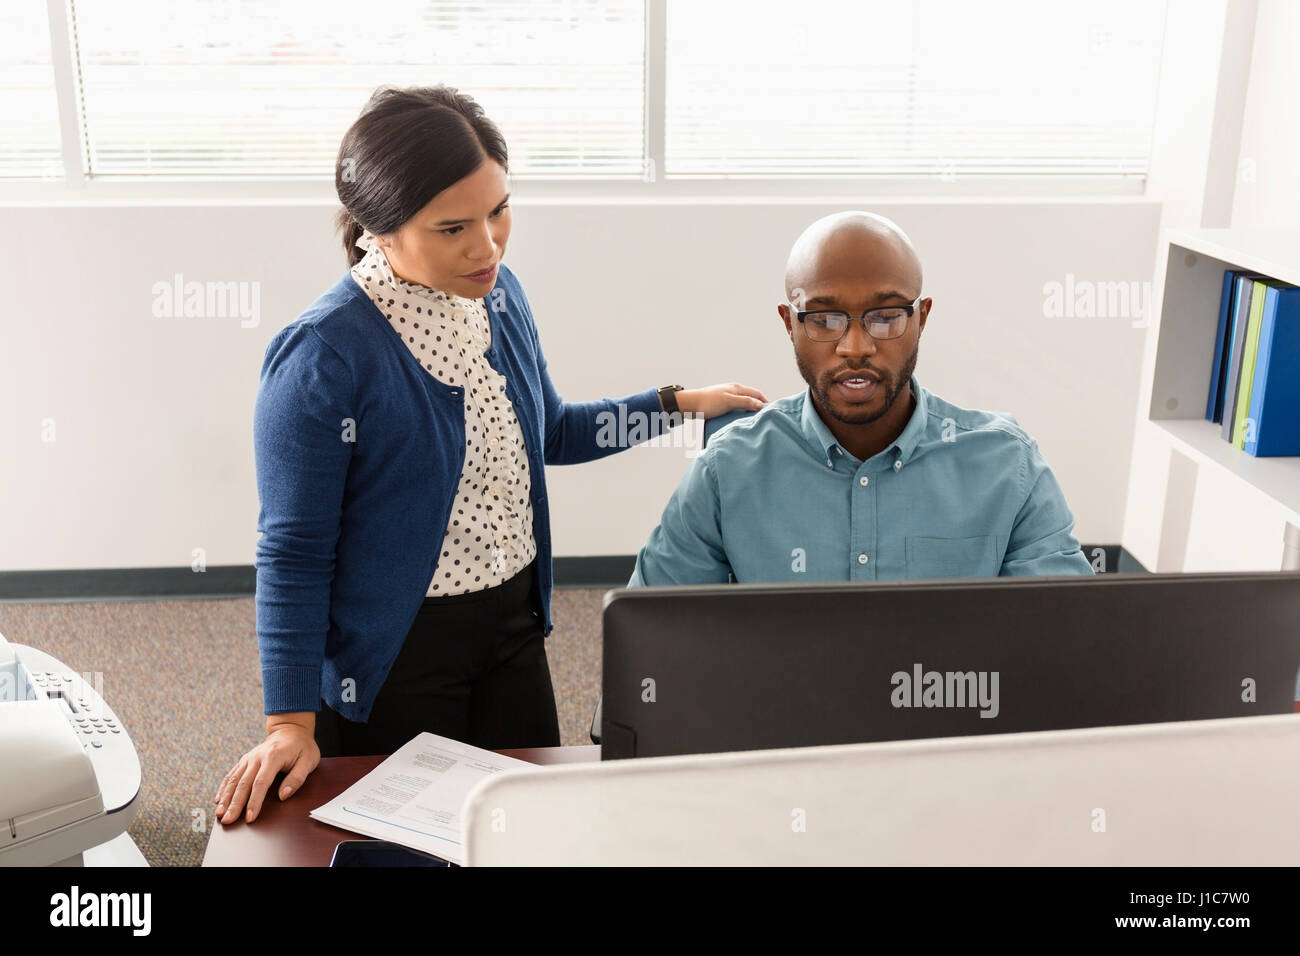 Man and woman working at computer in office Stock Photo